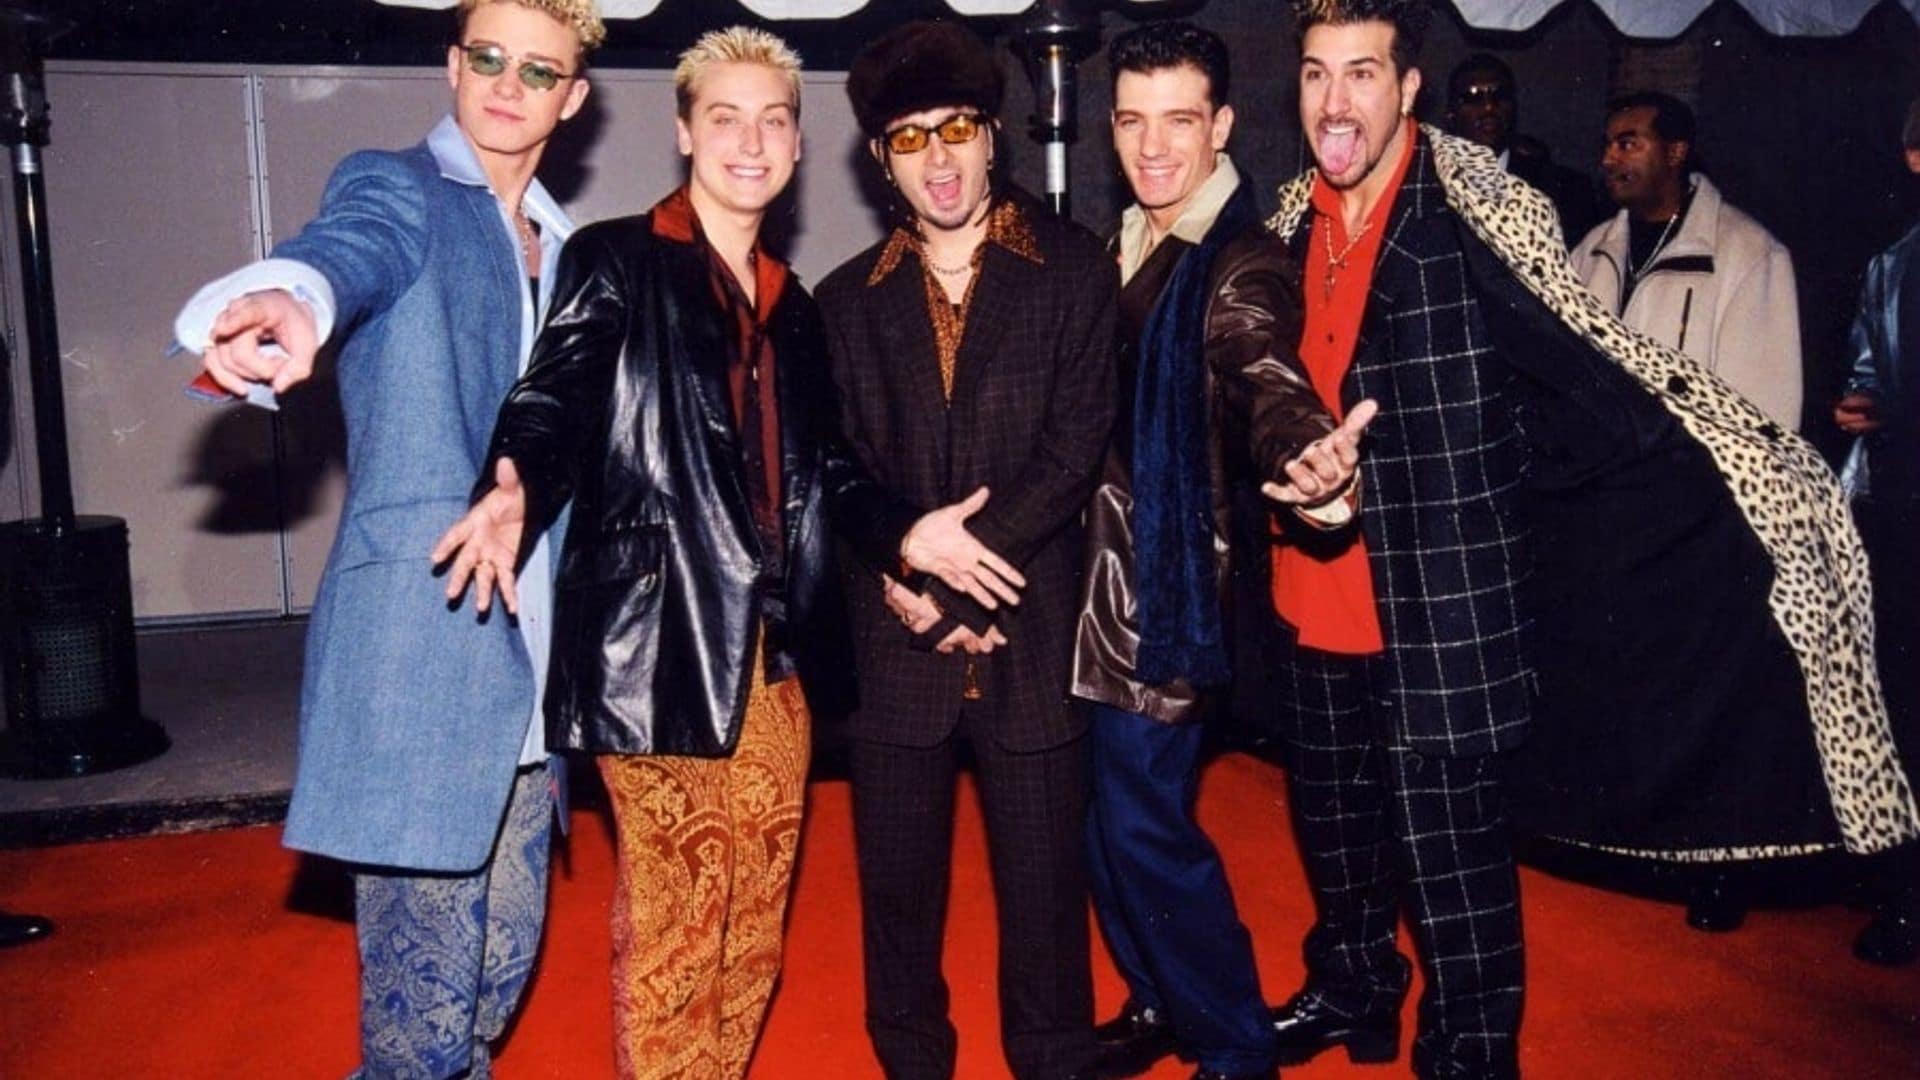 *NSYNC will reunite this year for 'something special'